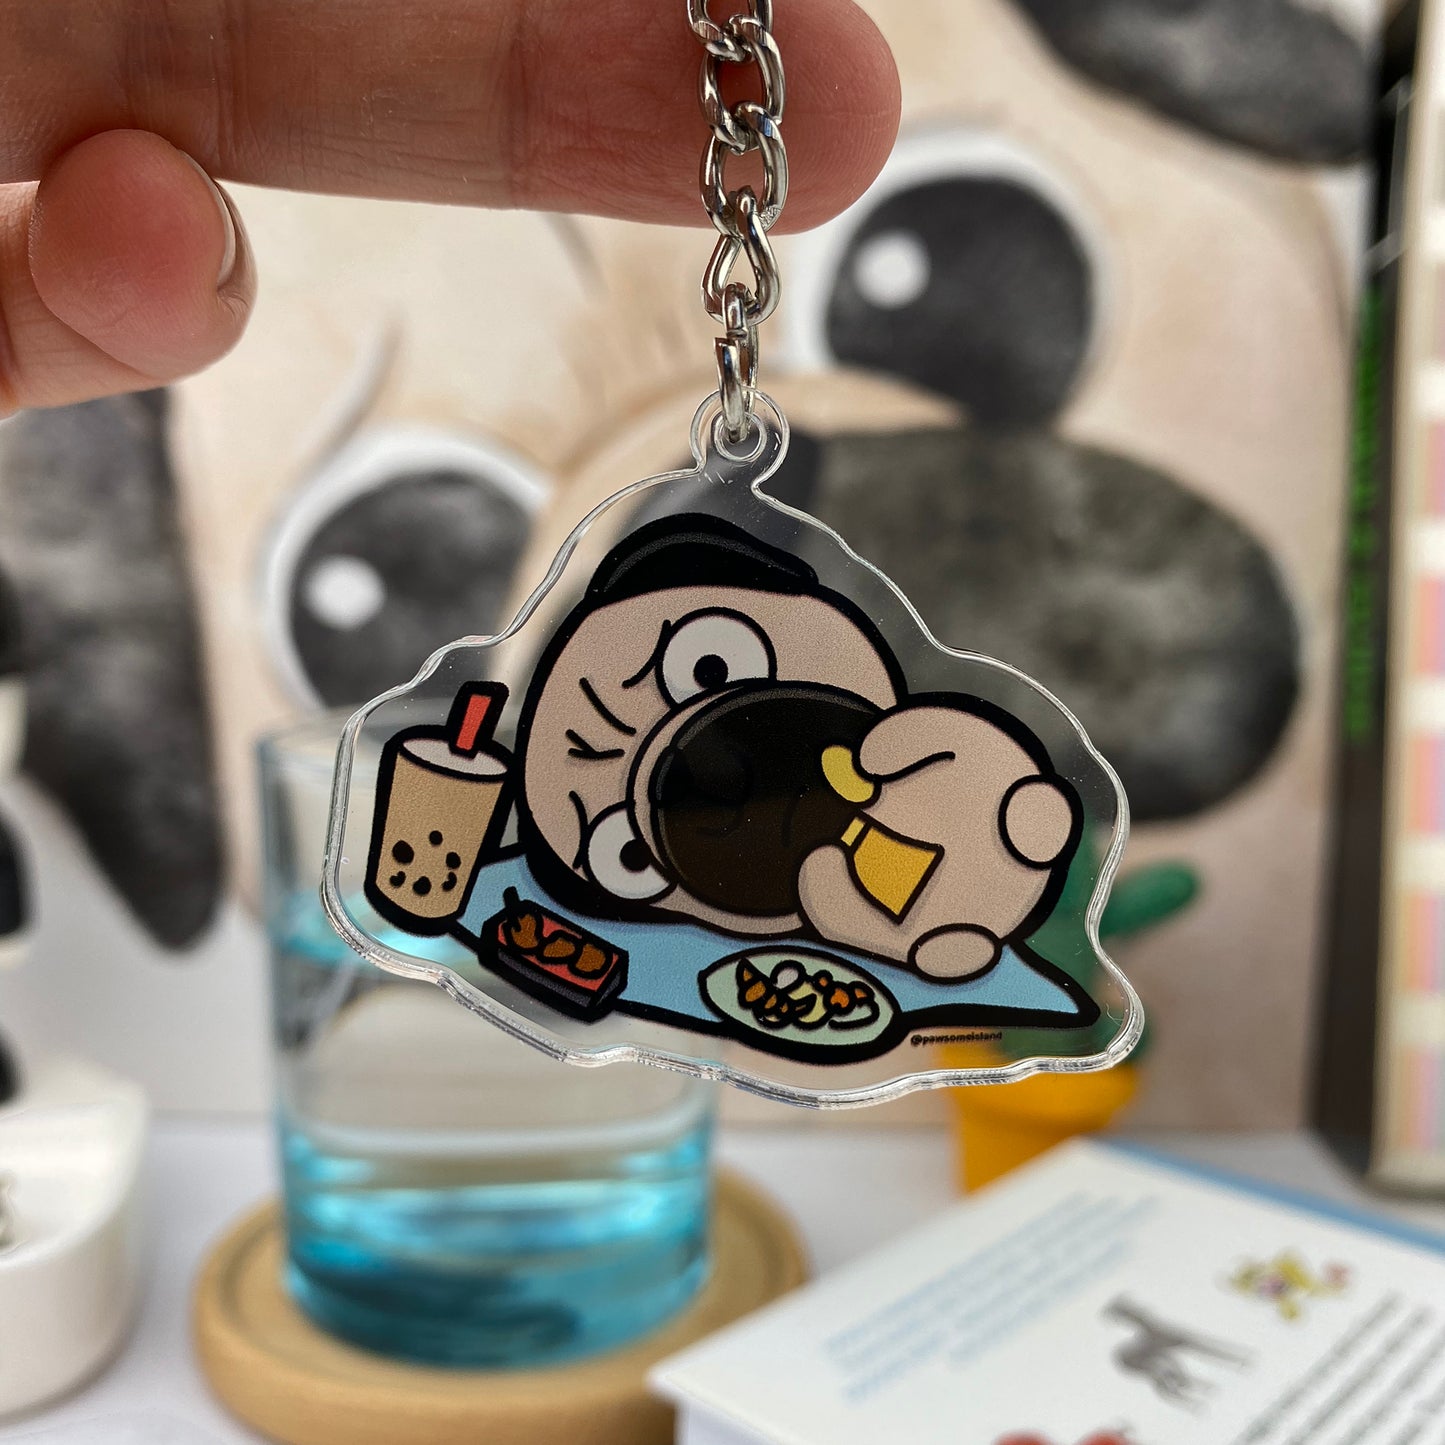 Starling Mike double-sided keychain let's play it together